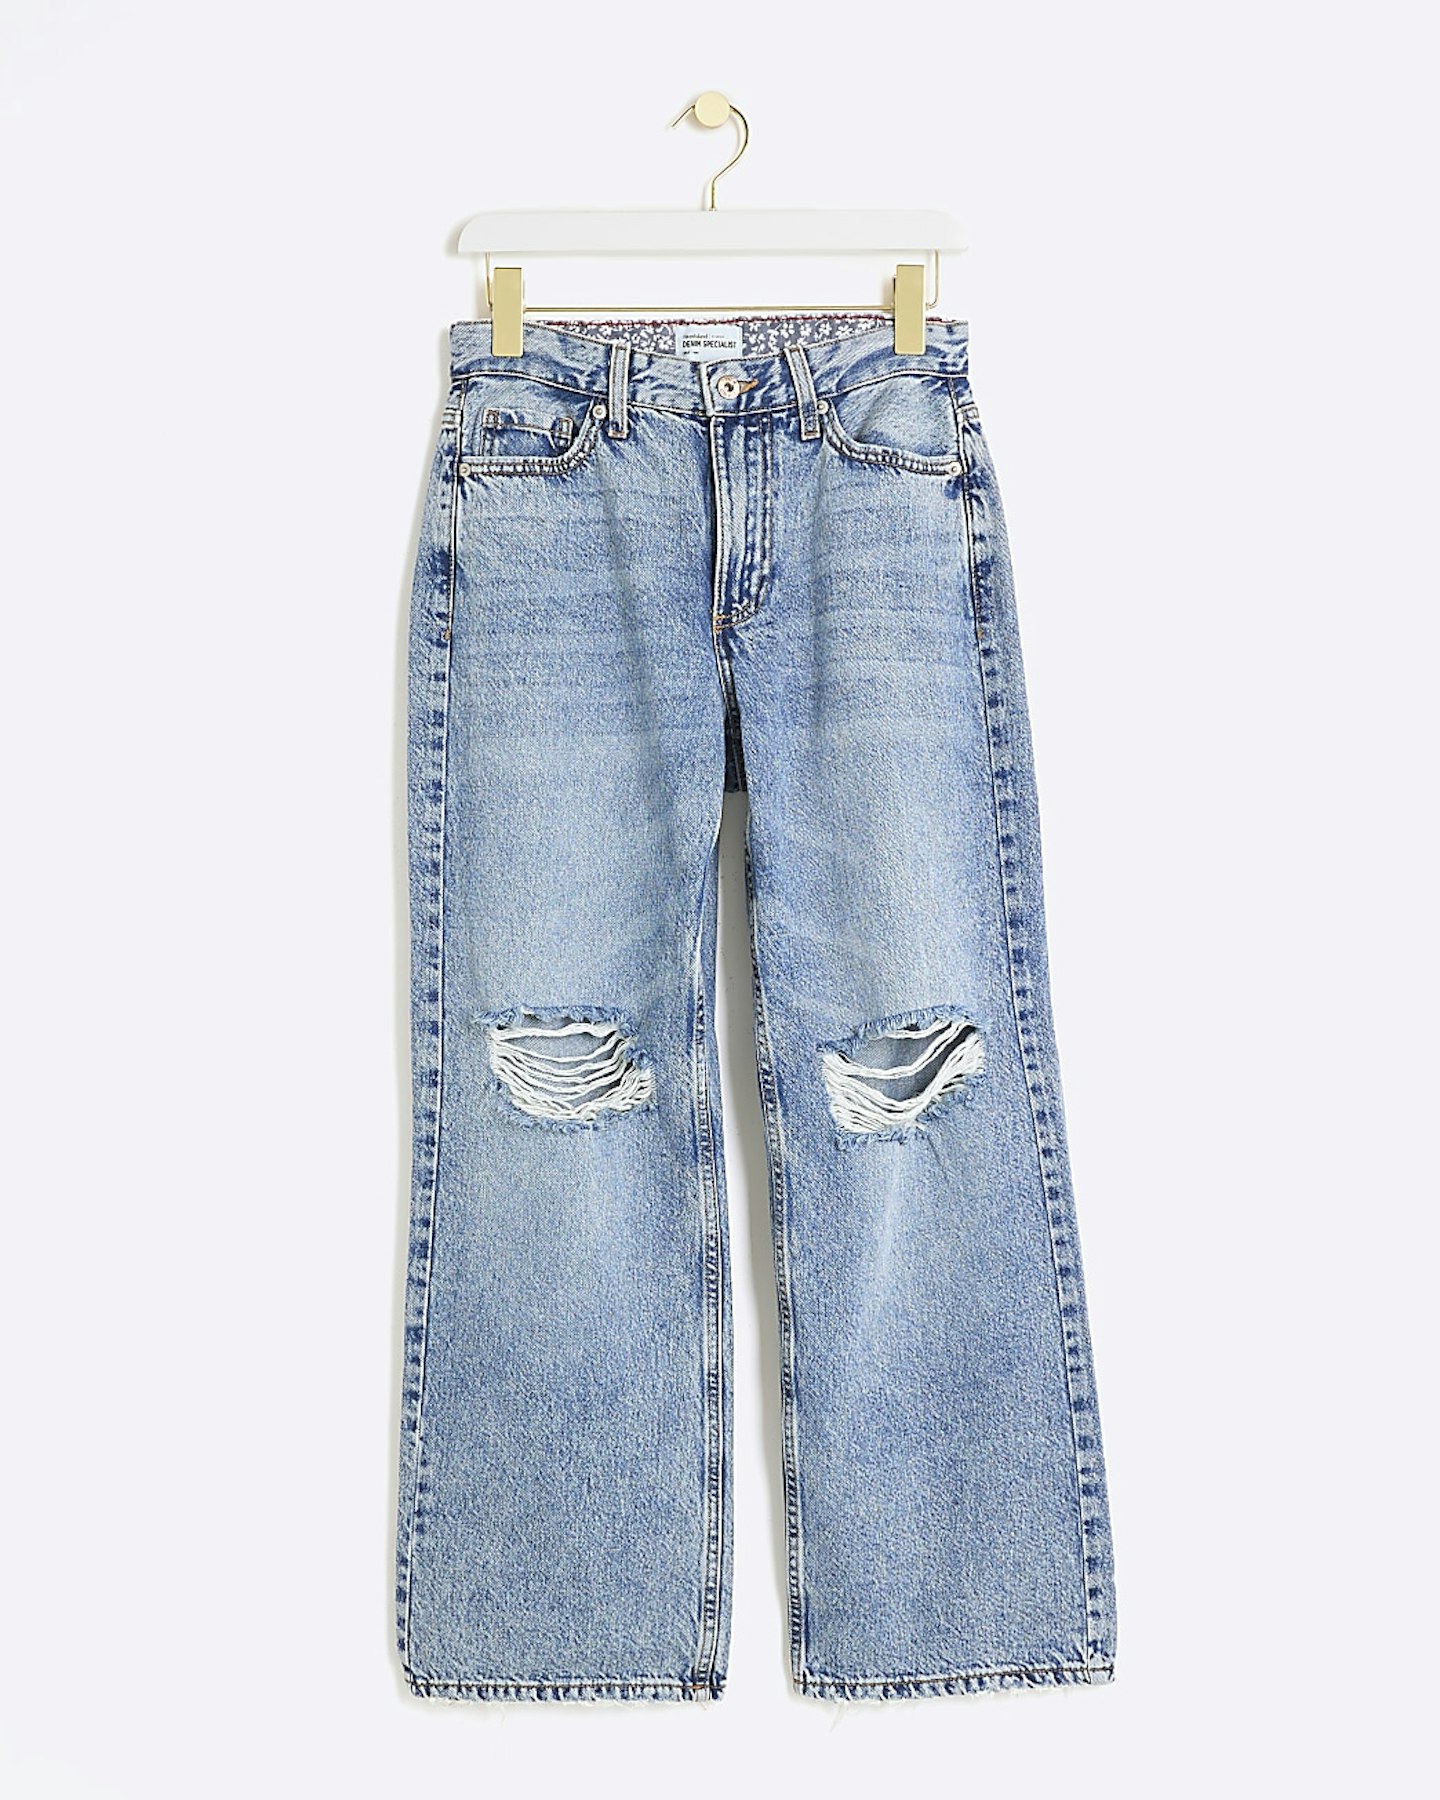 River Island, Petite Blue Ripped Jeans